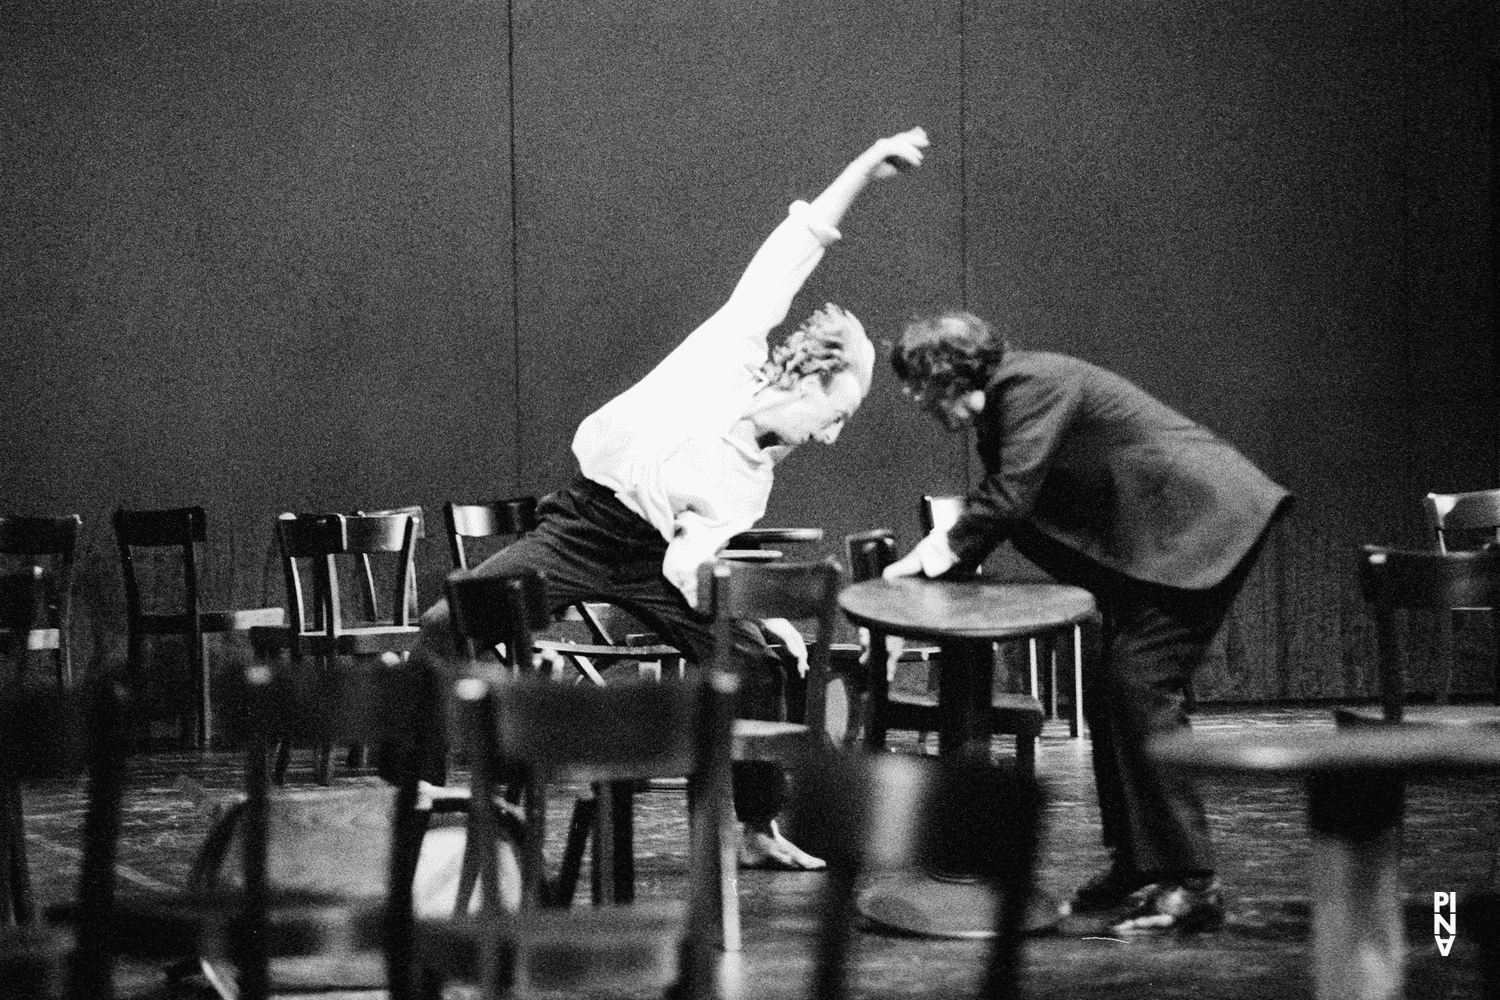 Dominique Mercy and Jean Laurent Sasportes in “Café Müller” by Pina Bausch